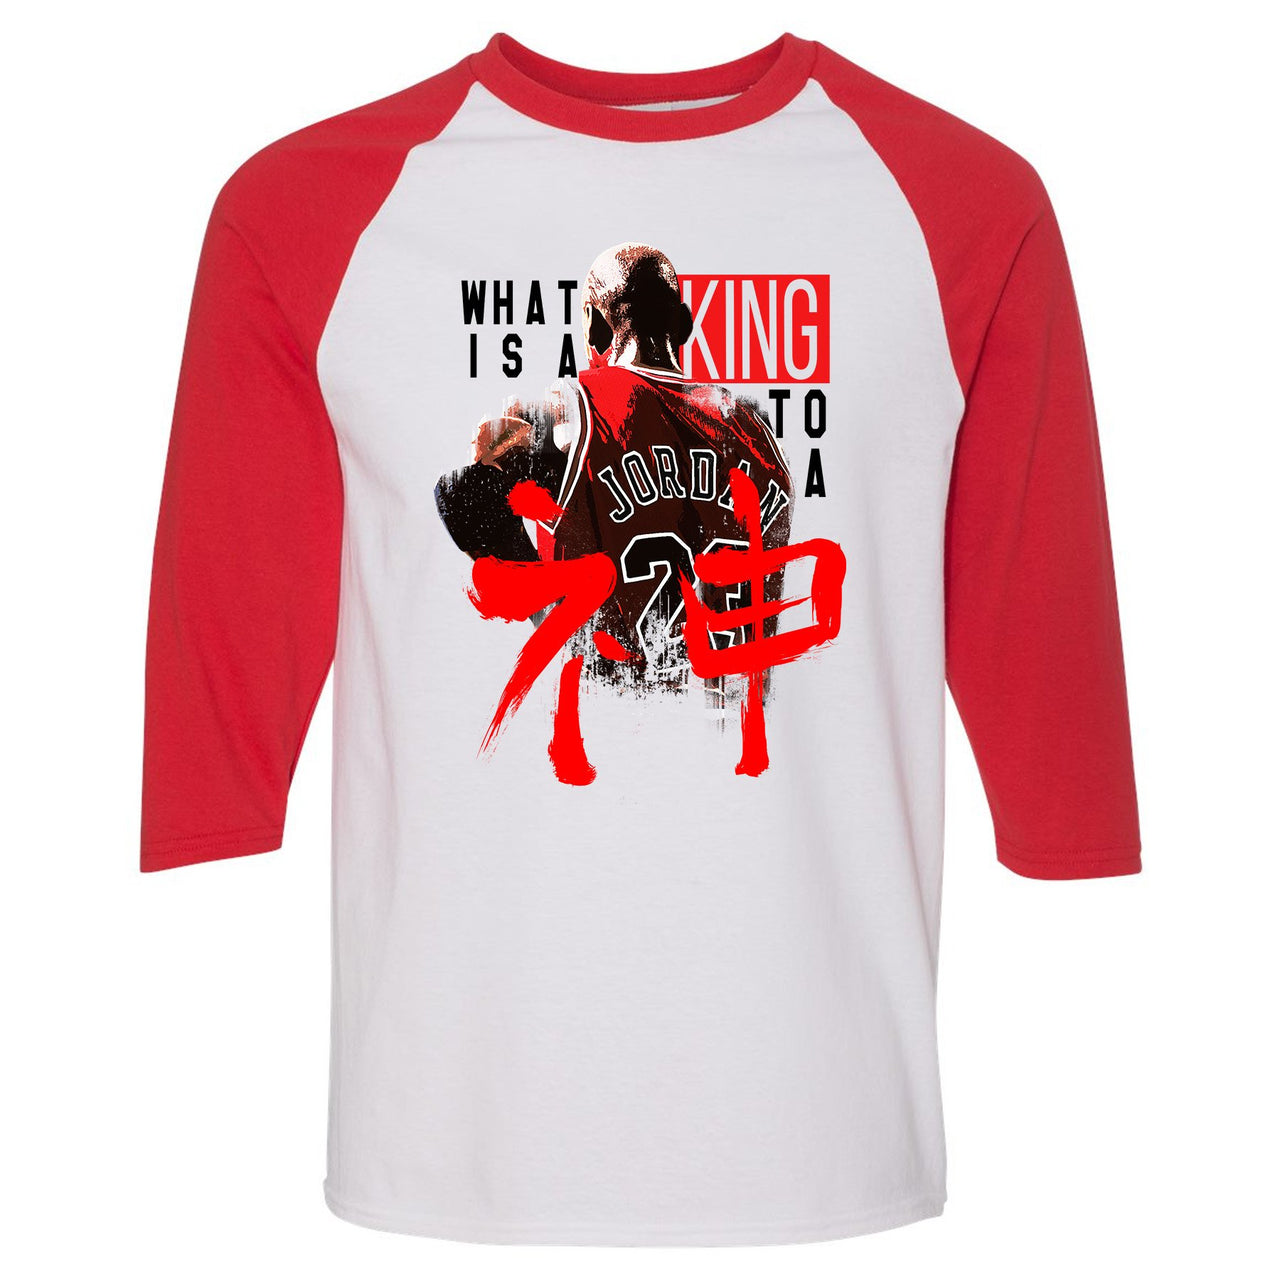 Reflections of a Champion 8s Raglan T Shirt | What Is A King To A God, White and Red